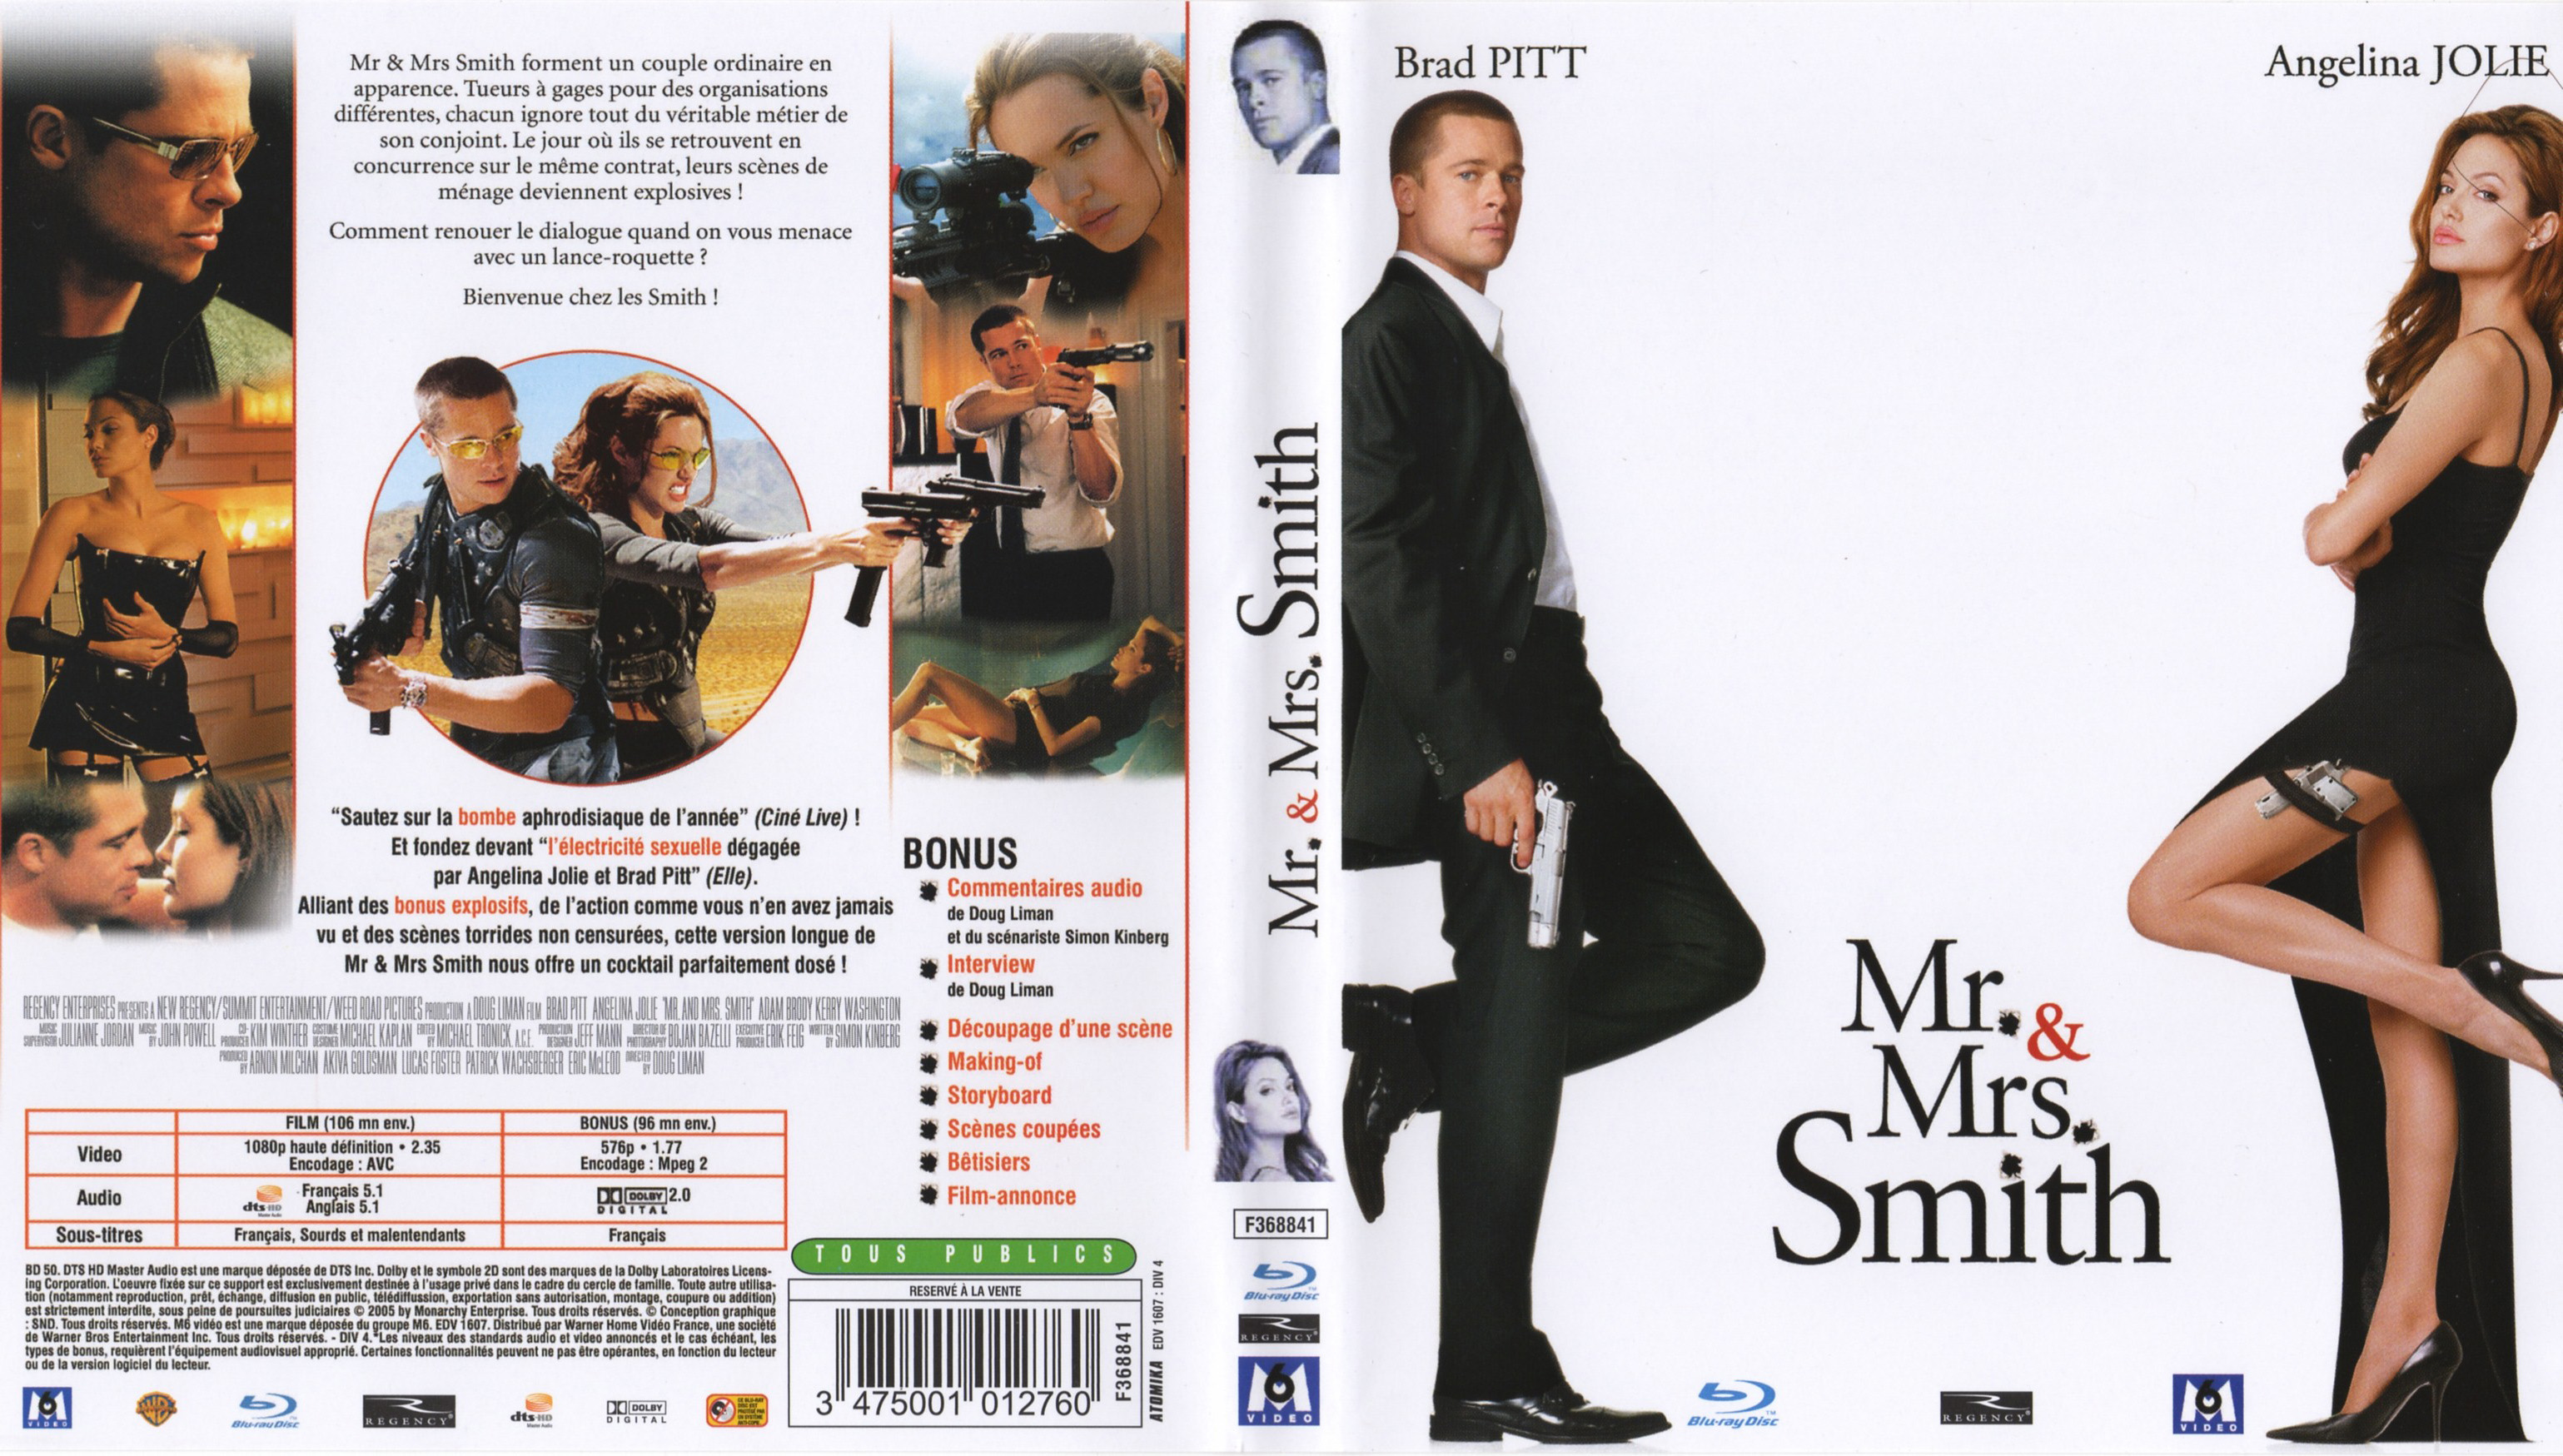 Jaquette DVD Mr et Mrs Smith (BLU-RAY)